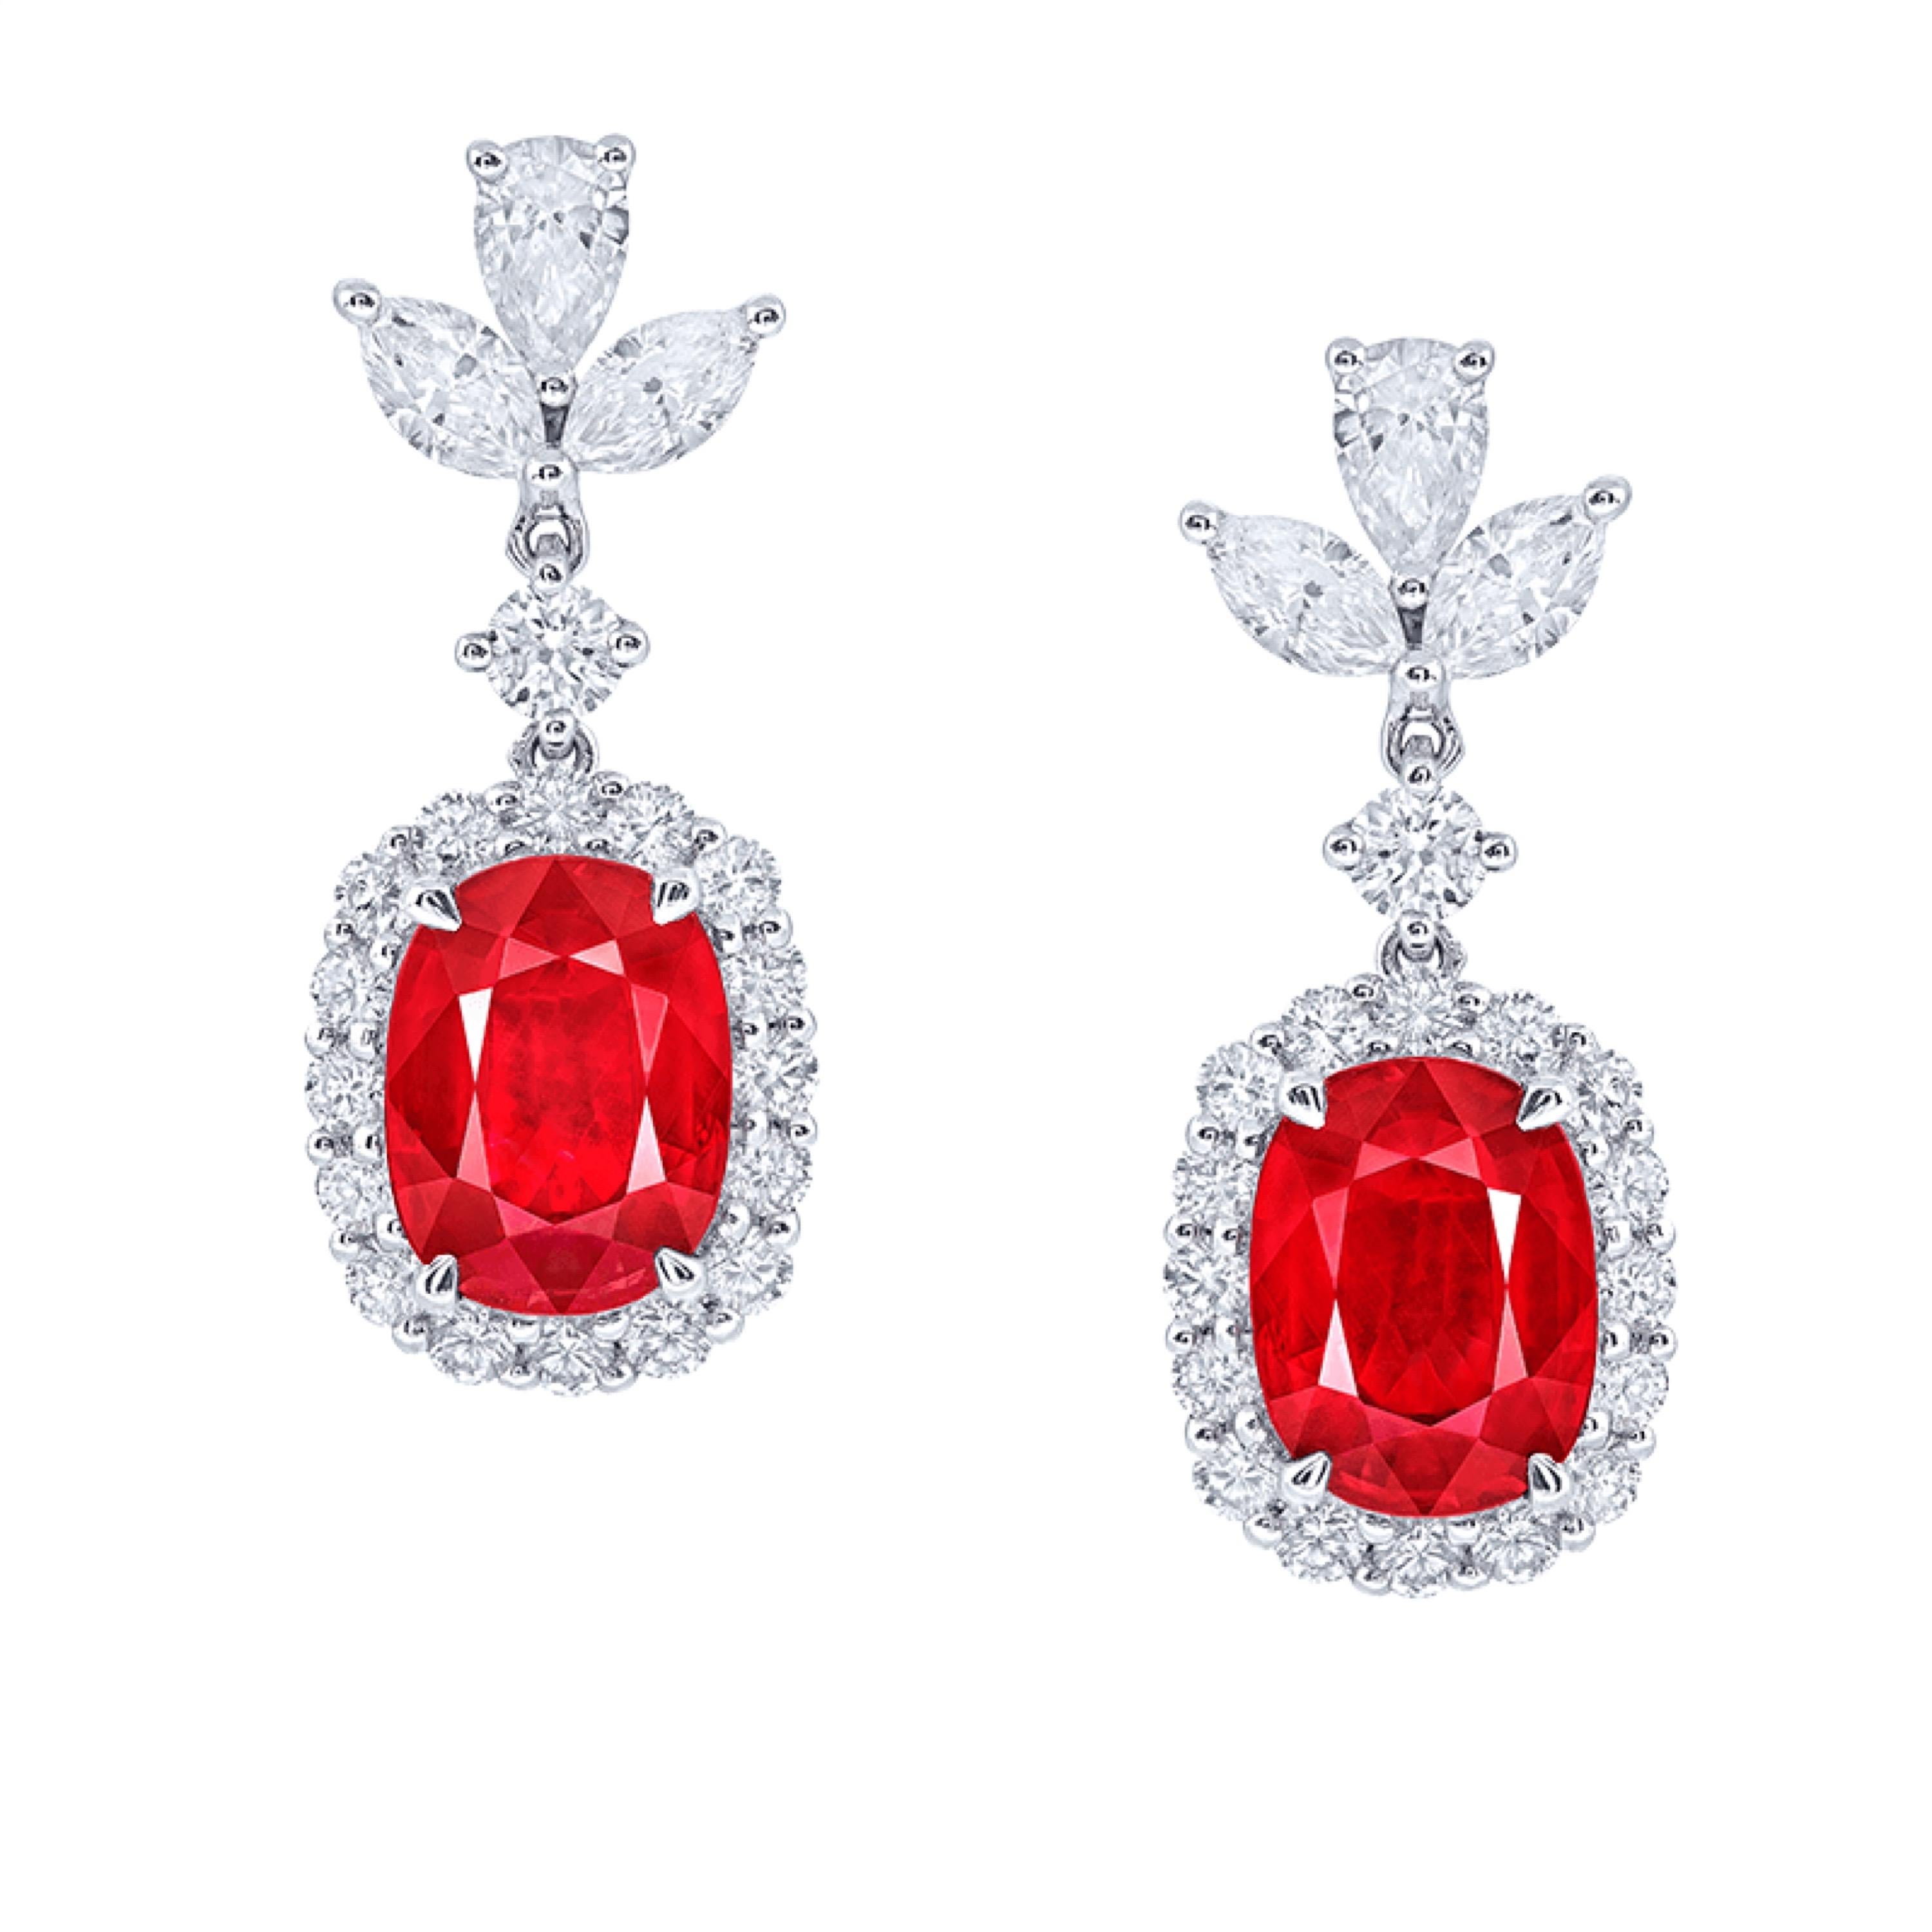 Two center rubies: 2.13 carats Vivid Red OVAL, 2.08 carats Vivid Red OVAL
Setting: 4 fancy-cut marquise white diamonds with a total of about 0.47 carats, 2 fancy-cut water drop white diamonds with a total of about 0.31 carats, 34 round white